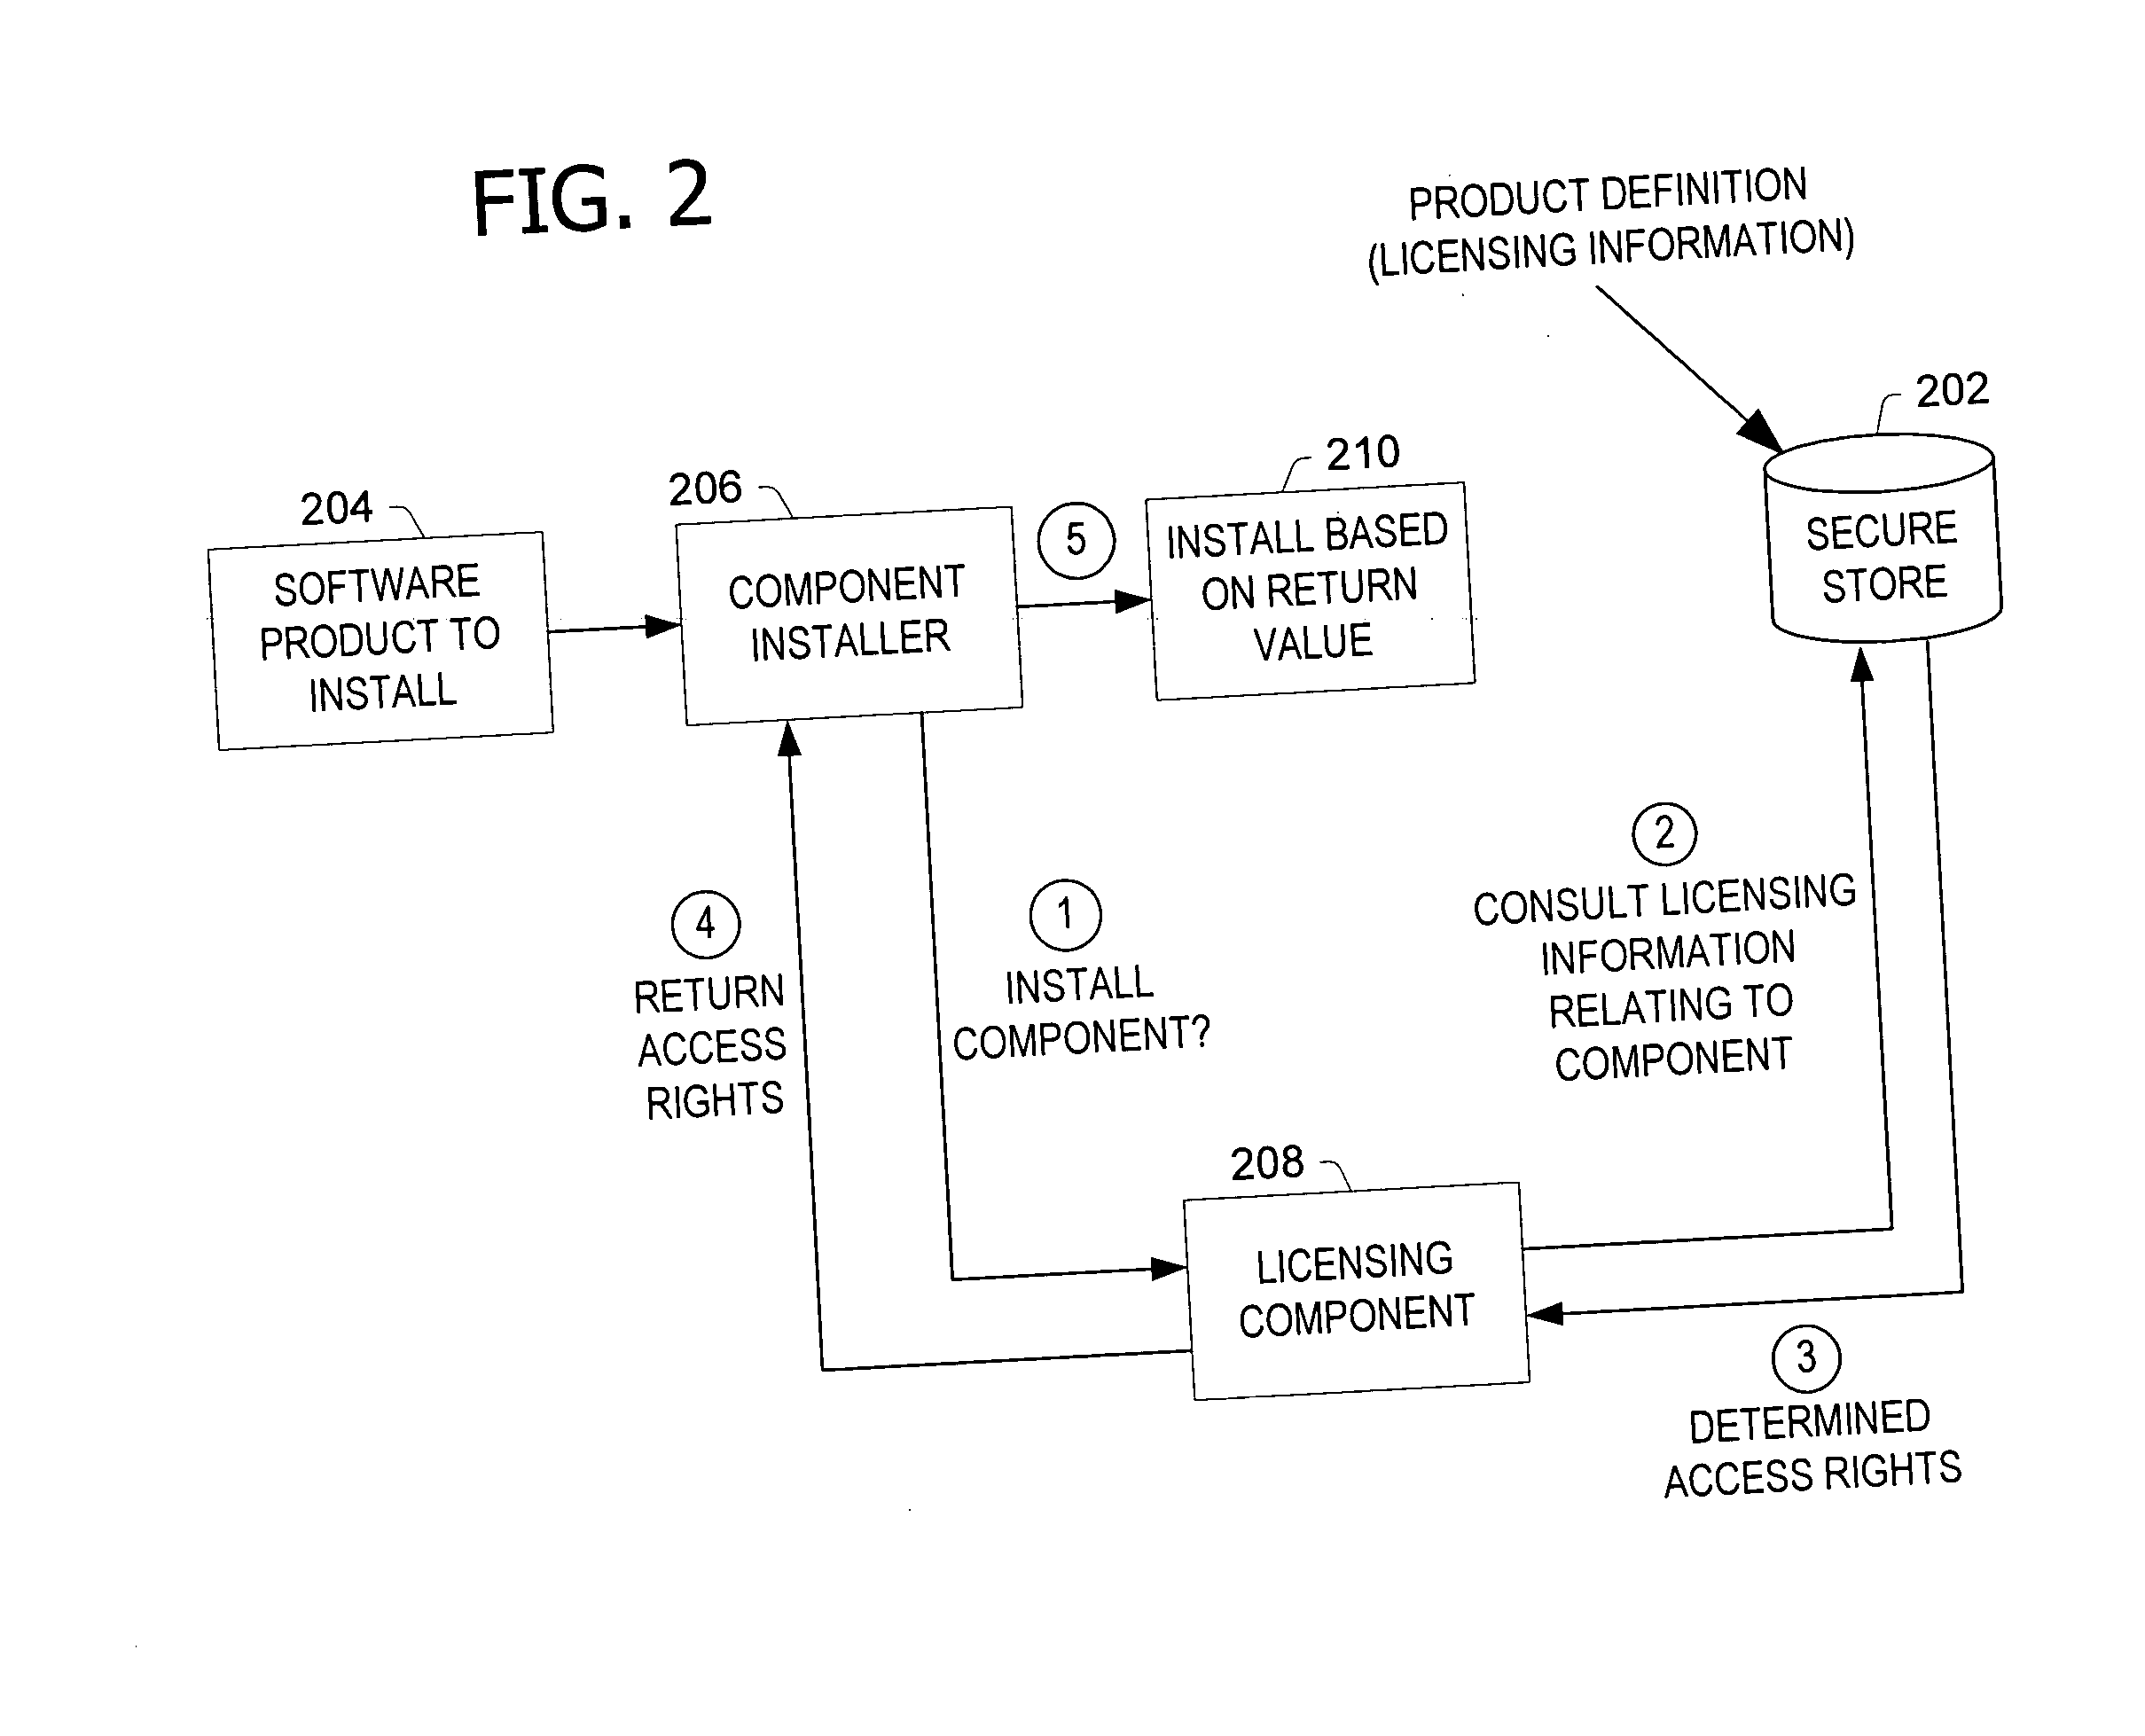 Selectively authorizing software functionality after installation of the software